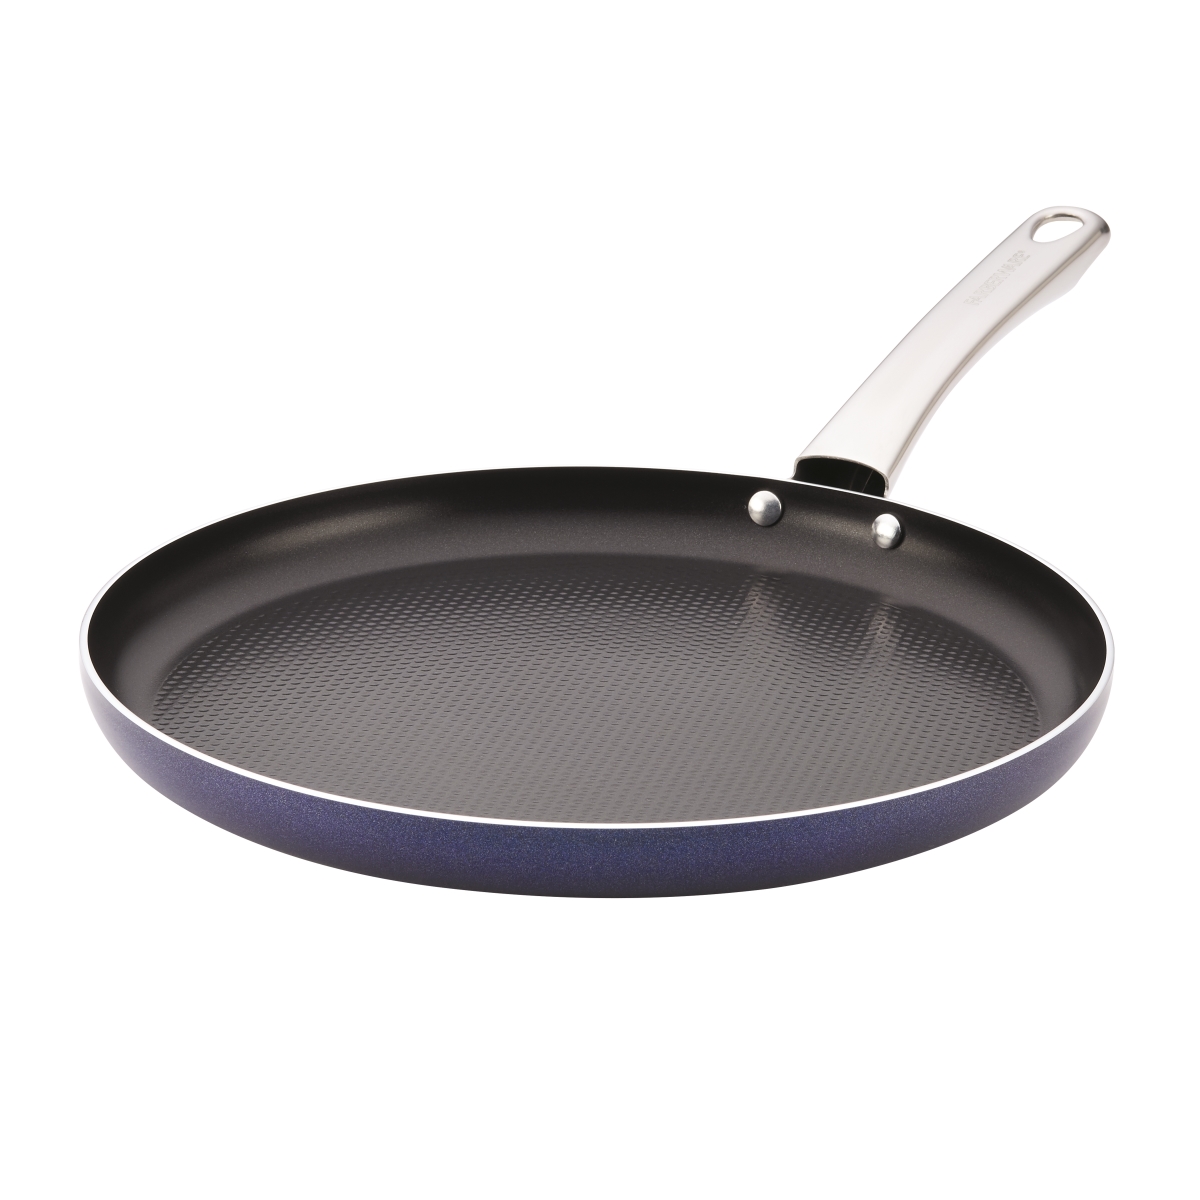 10051 Luminescence Aluminum Nonstick Round Griddle, Sapphire Shimmer - 12 In.